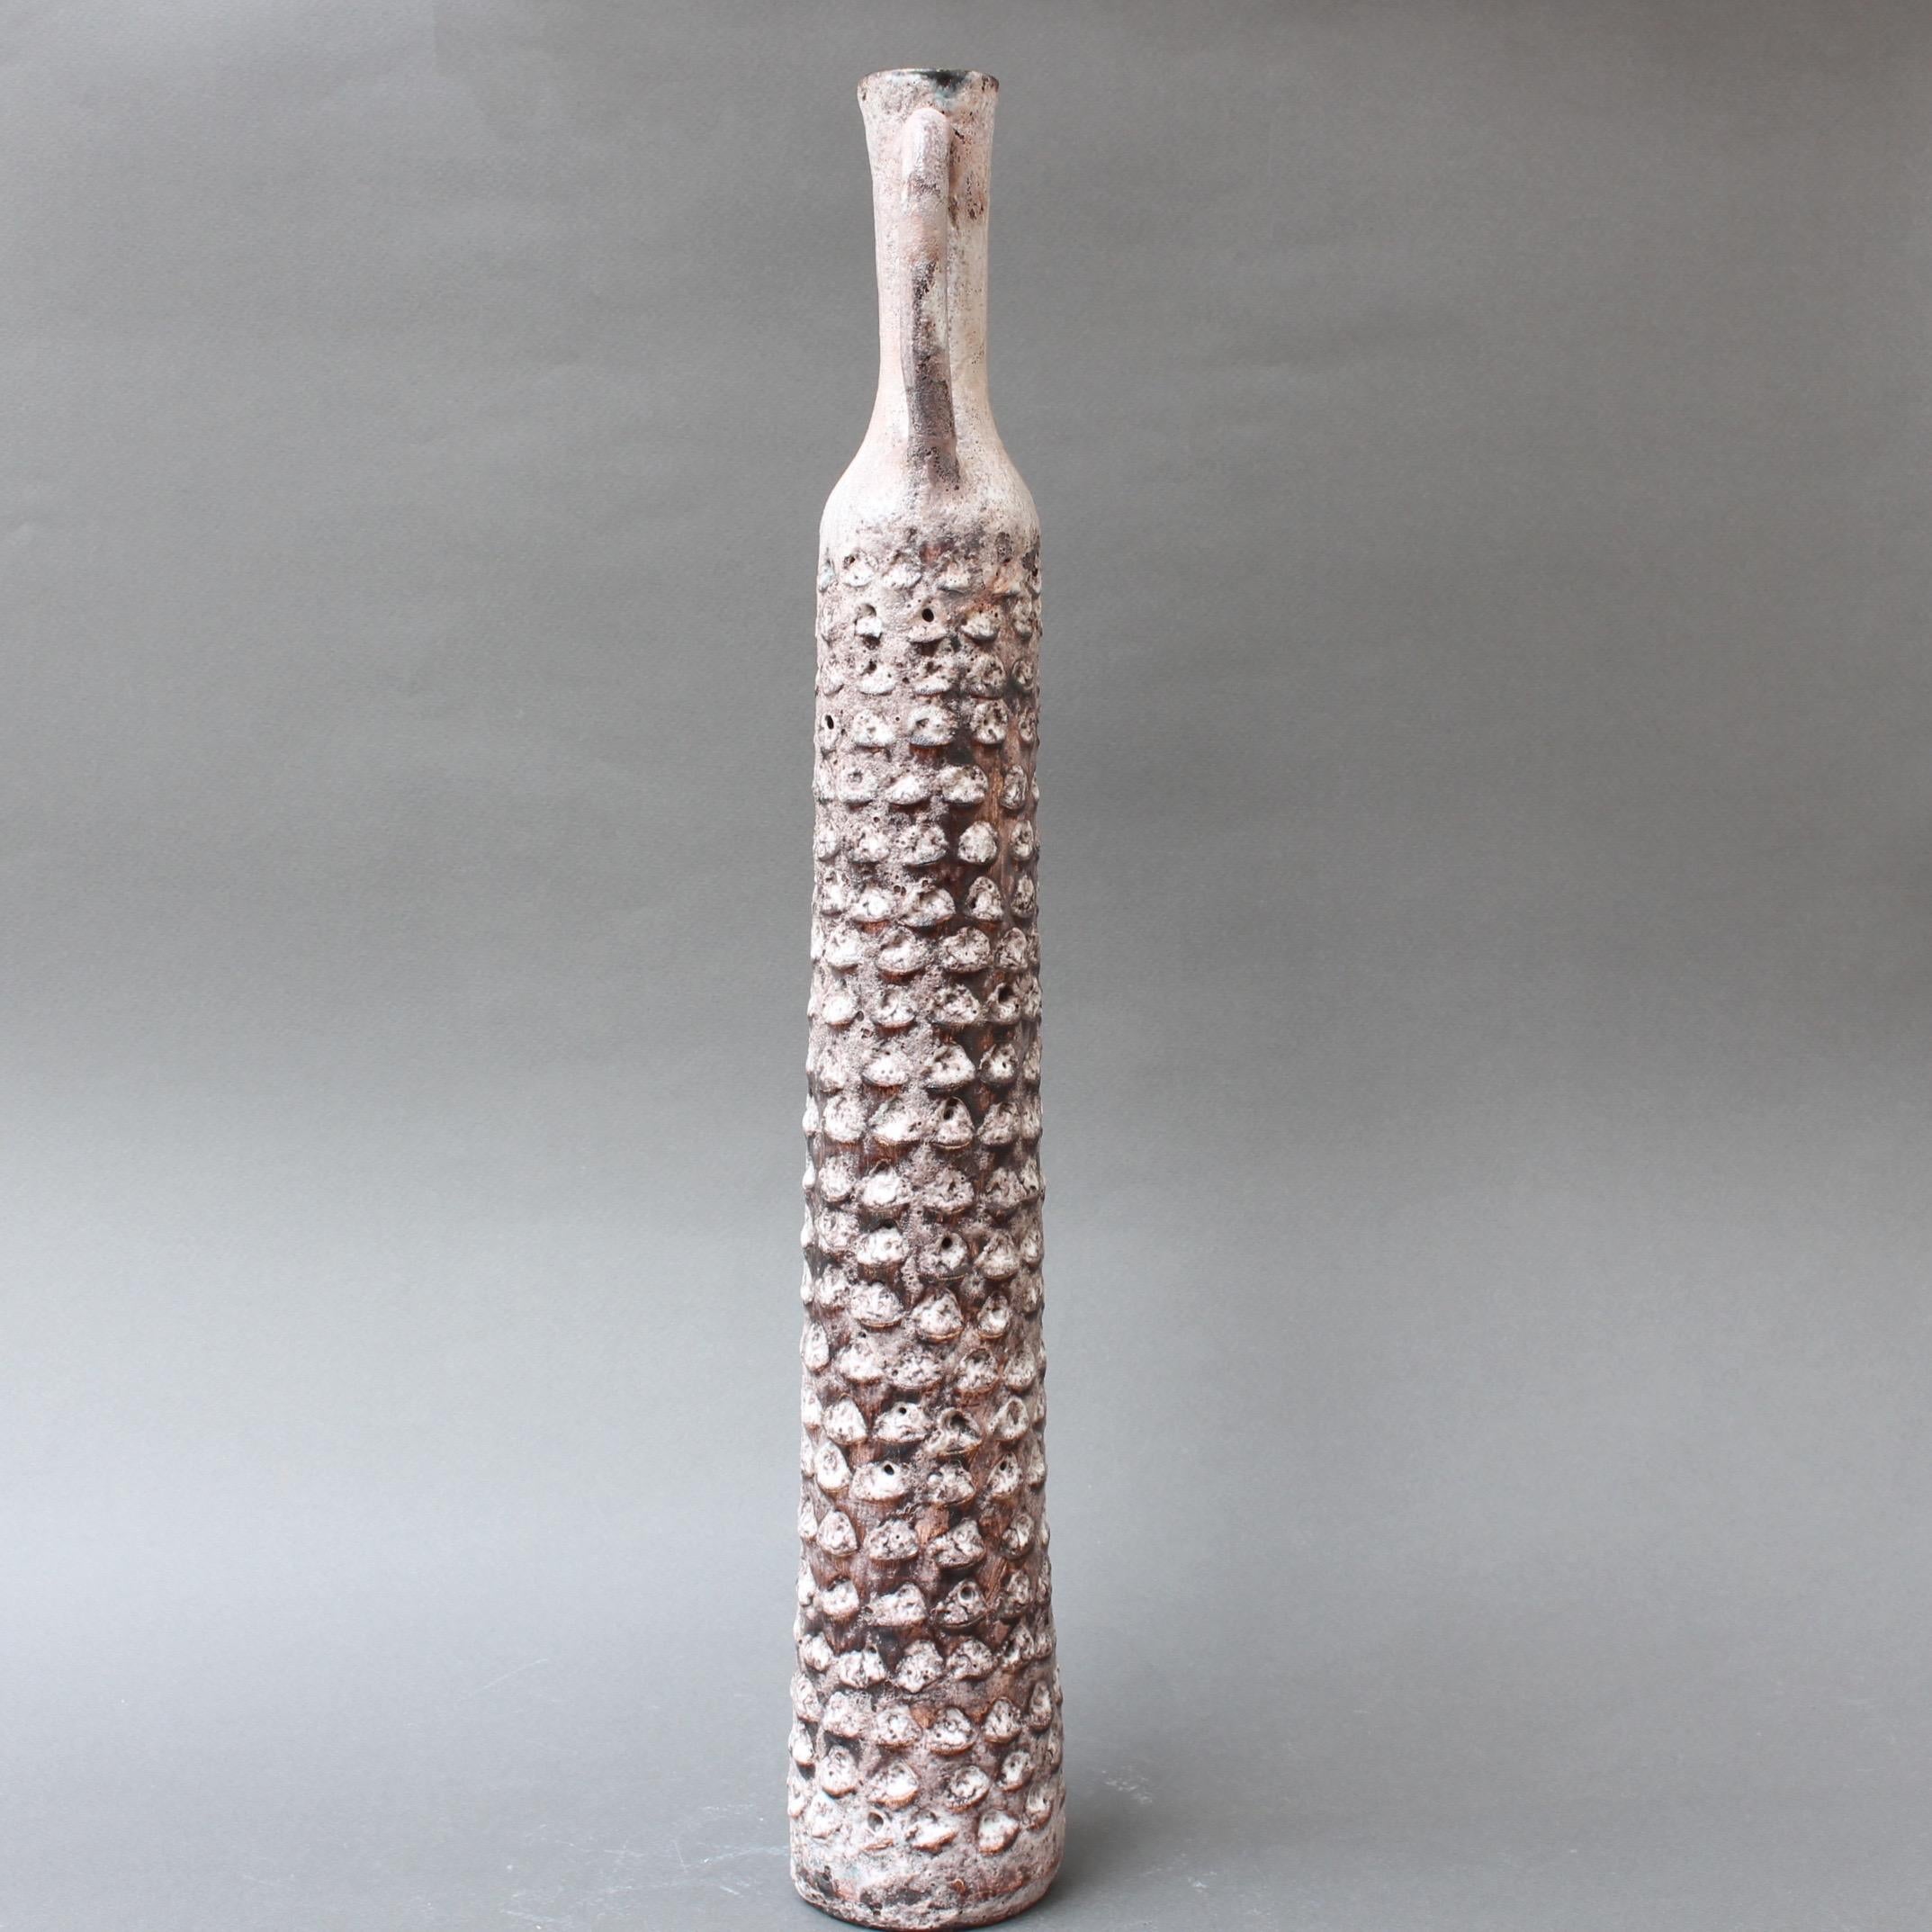 Mid-20th Century Decorative Elongated Ceramic Flower Vase by Jacques Pouchain, circa 1950s For Sale